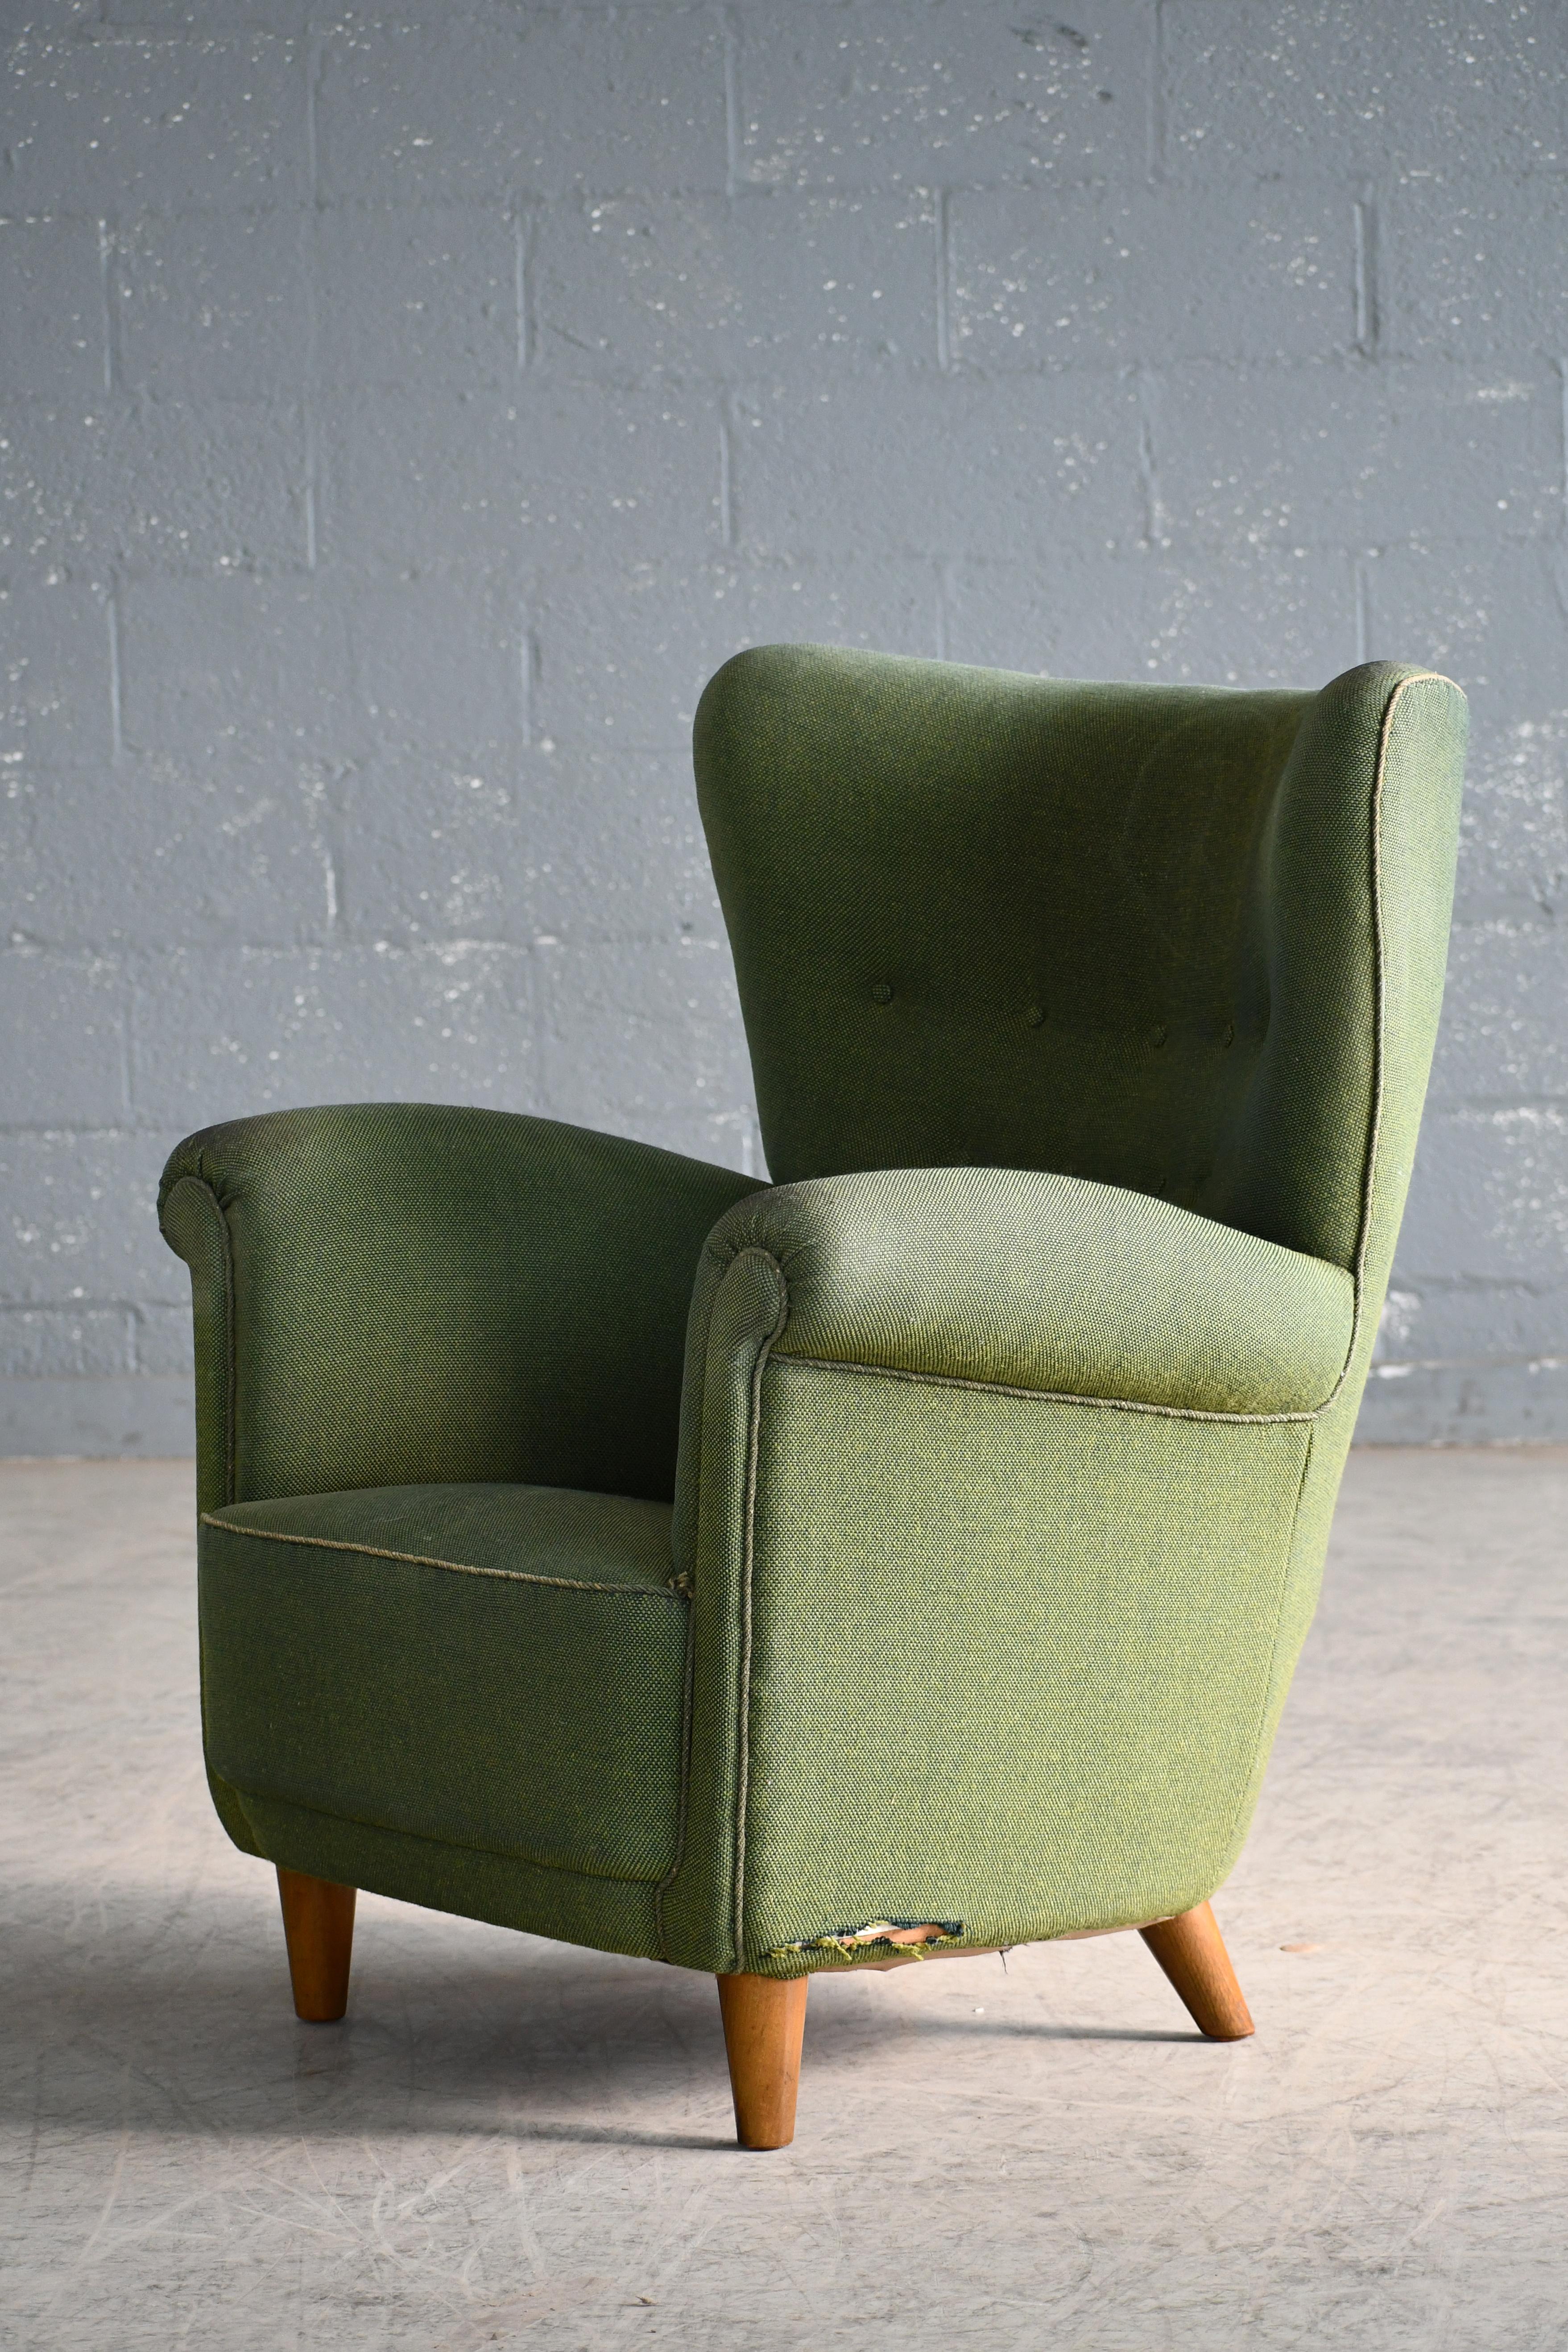 Danish Medium Highback Lounge Chair from the 1940s For Sale 3